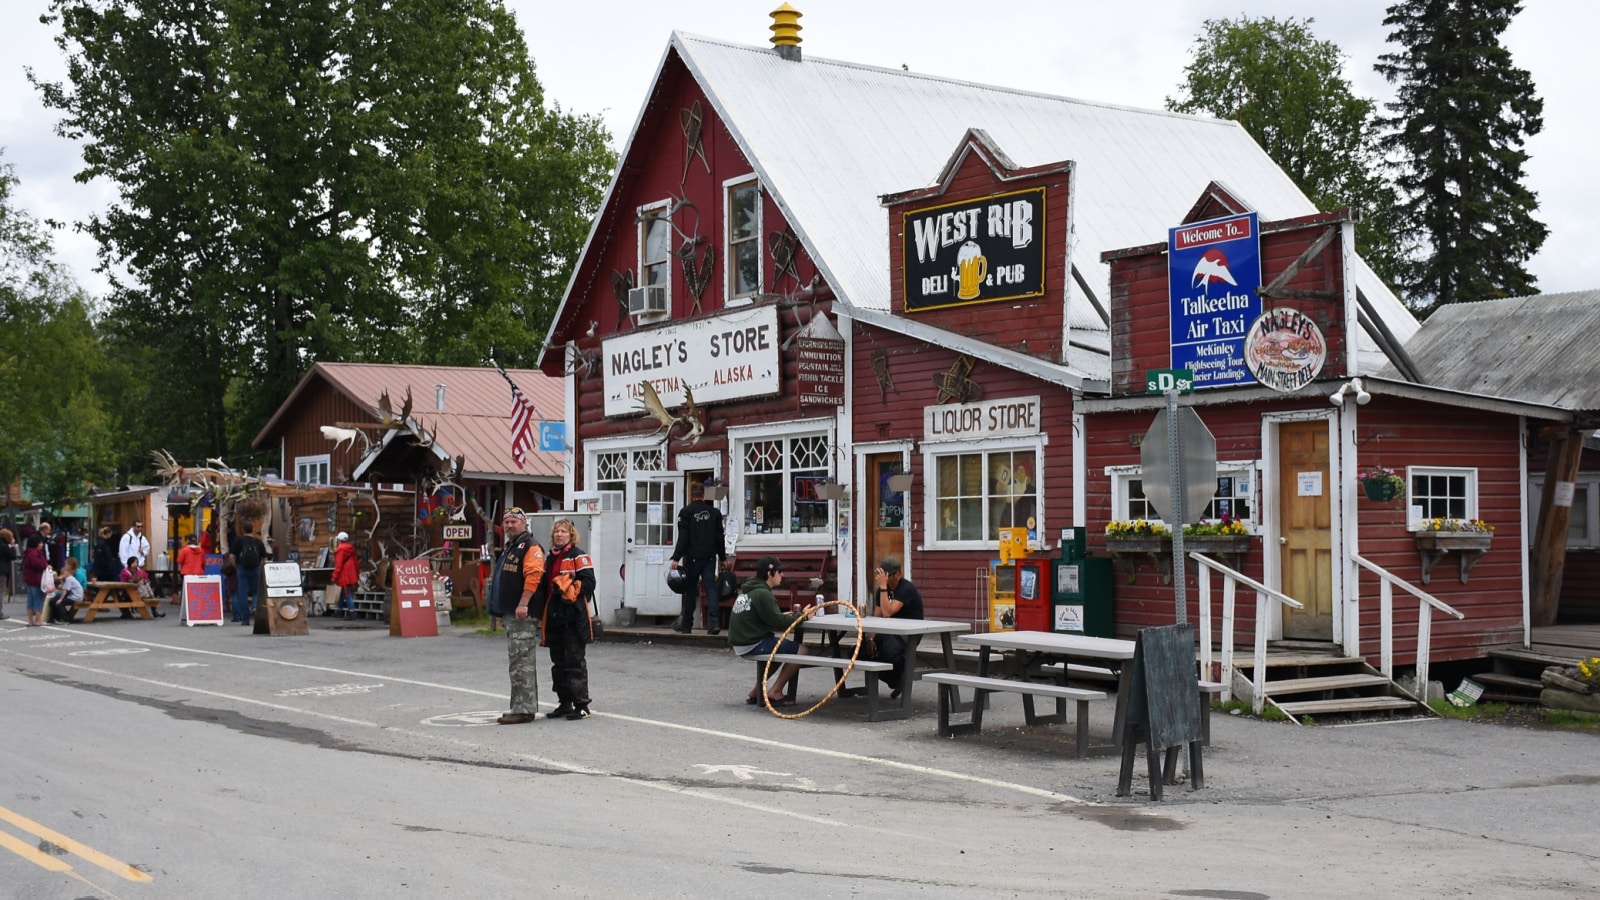 Talkeetna, Alaska - June, 21, 2016: Facade of stores and pubs in the small old town of Talkeetna